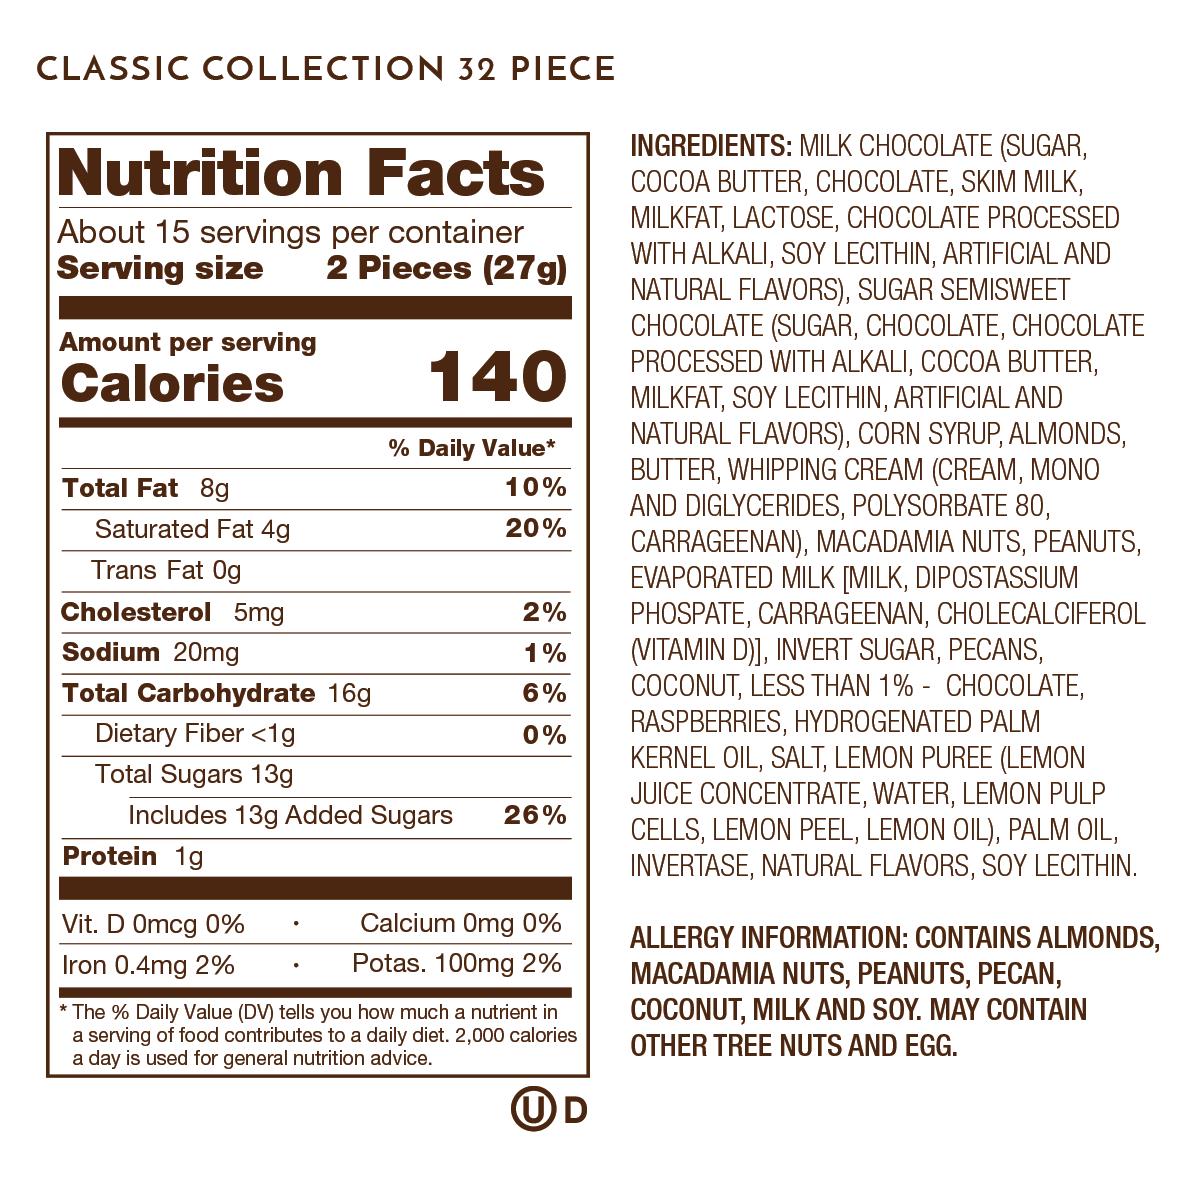 Nutrition Facts, Allergy and Ingredients Label on Classic Collection 12 Piece.